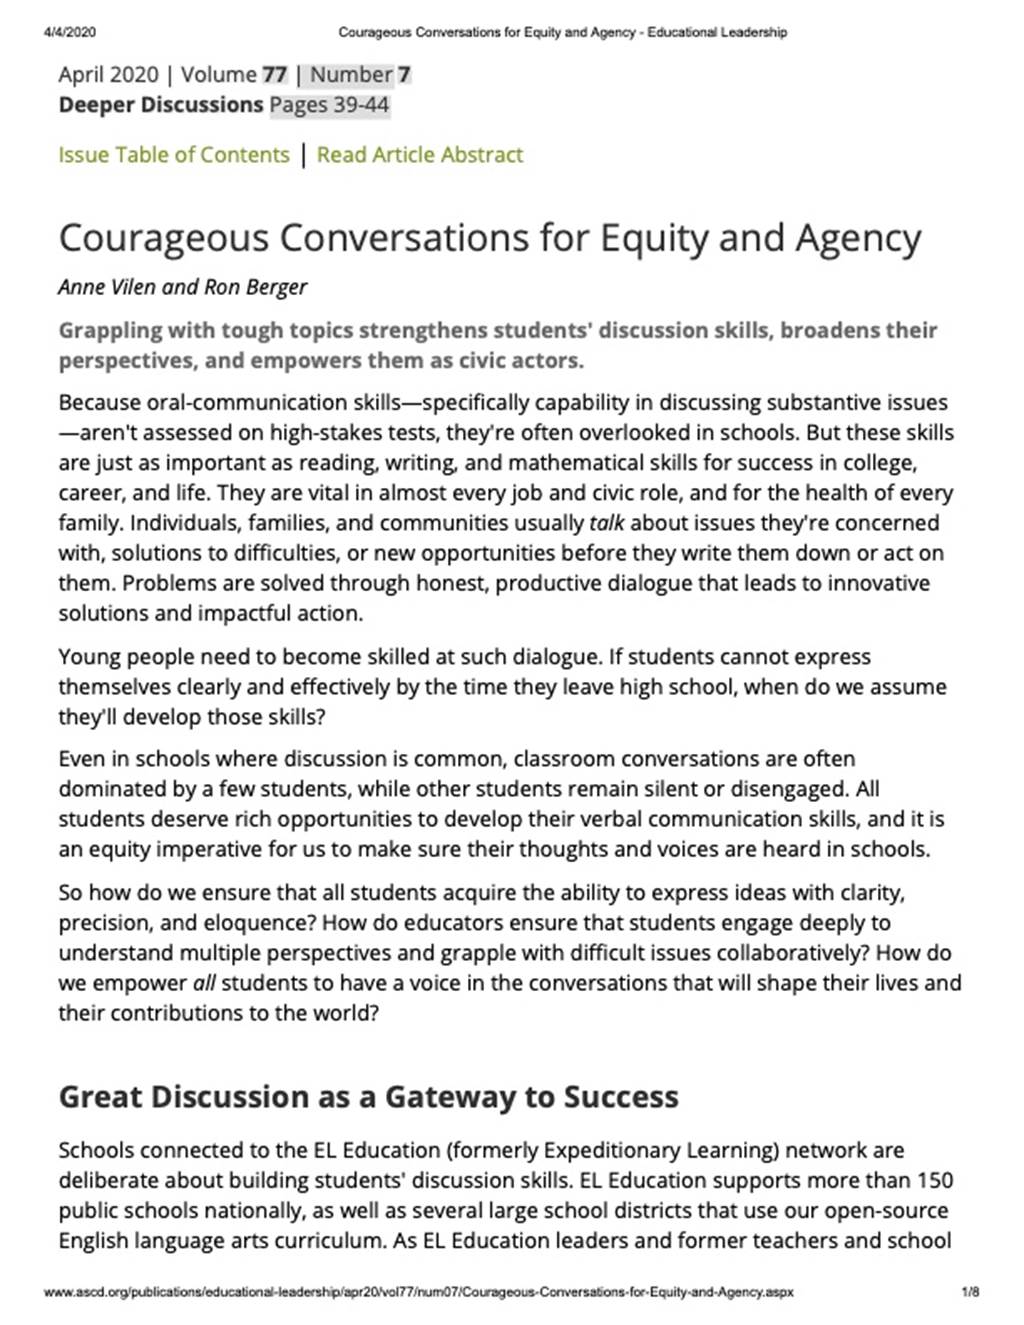 Courageous Conversations for Equity and Agency Image